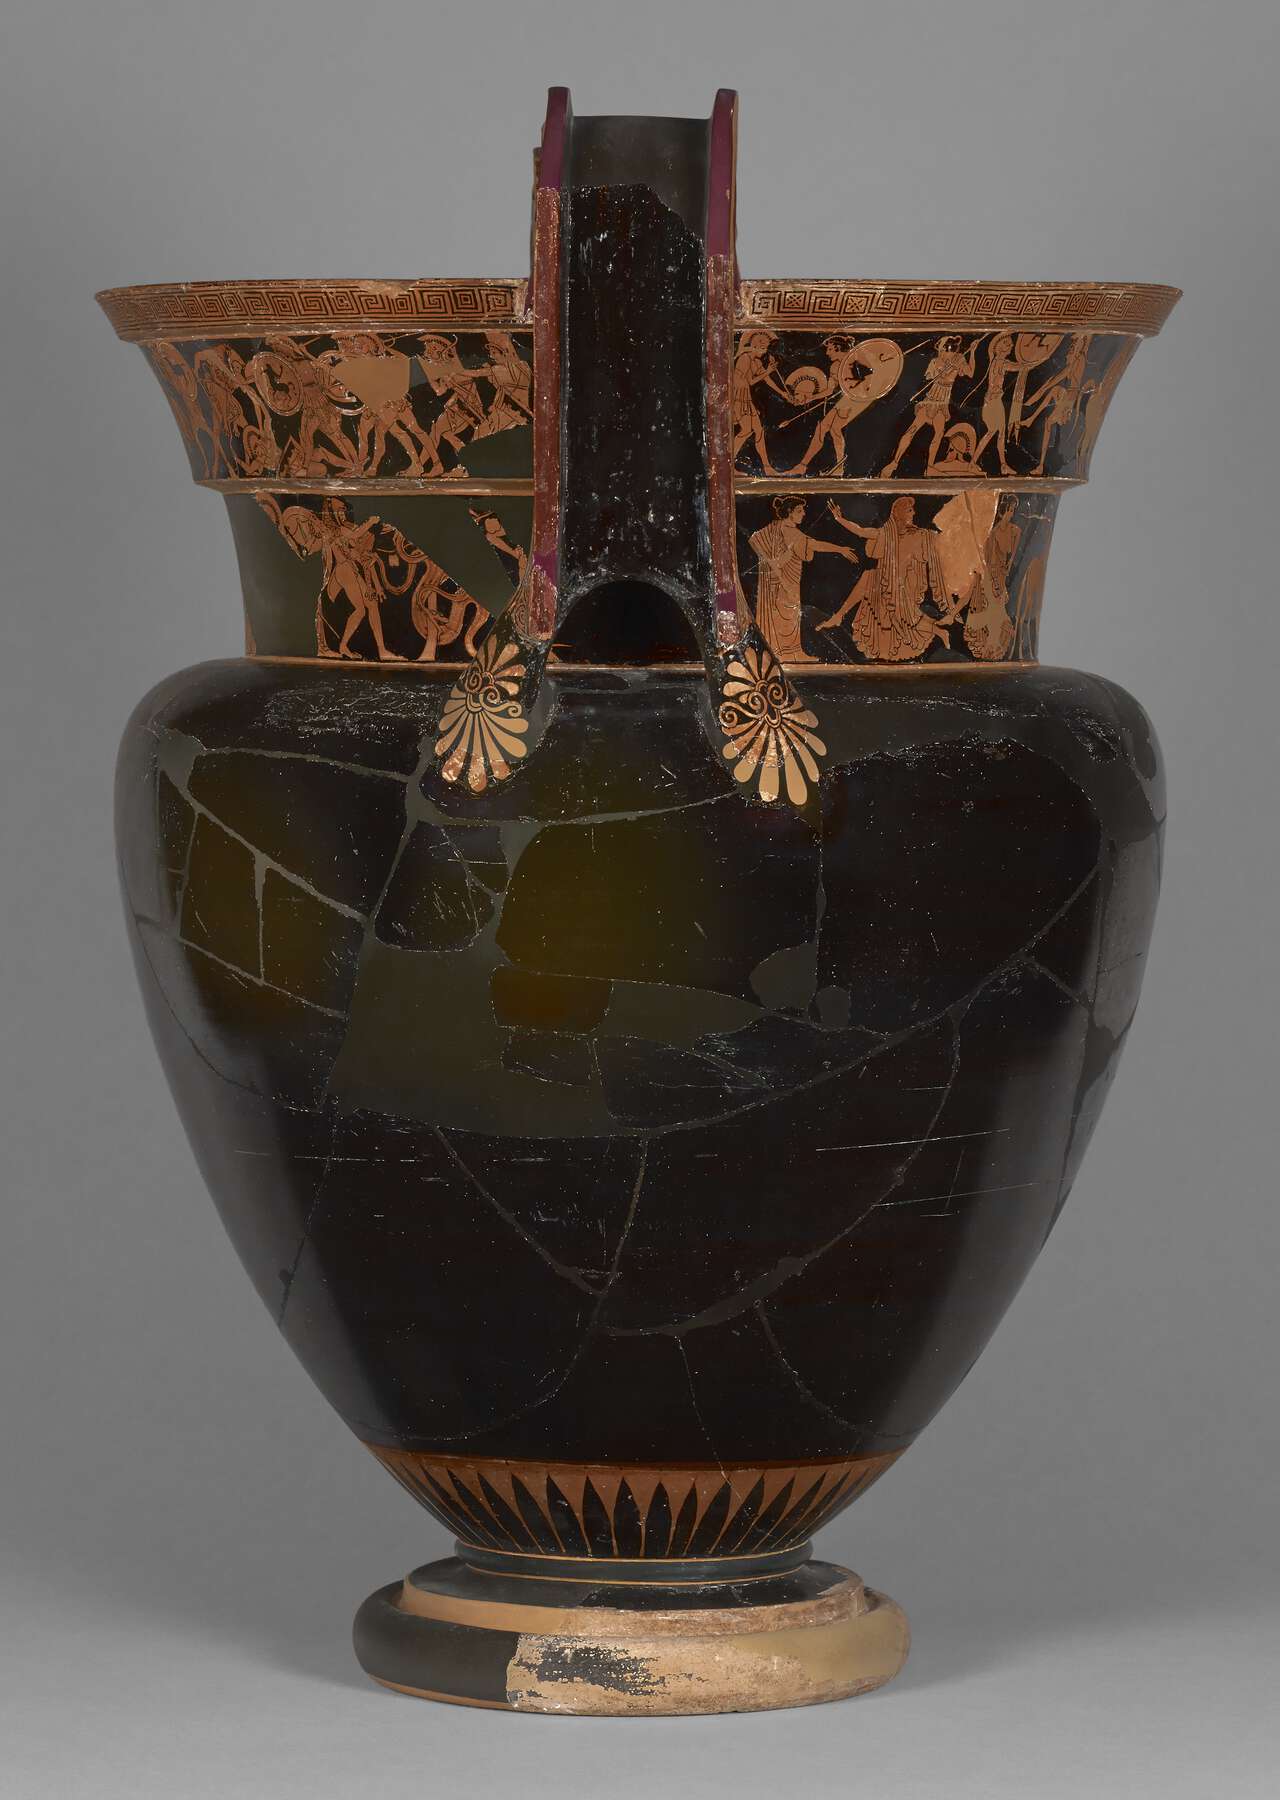 One side of the restored vase